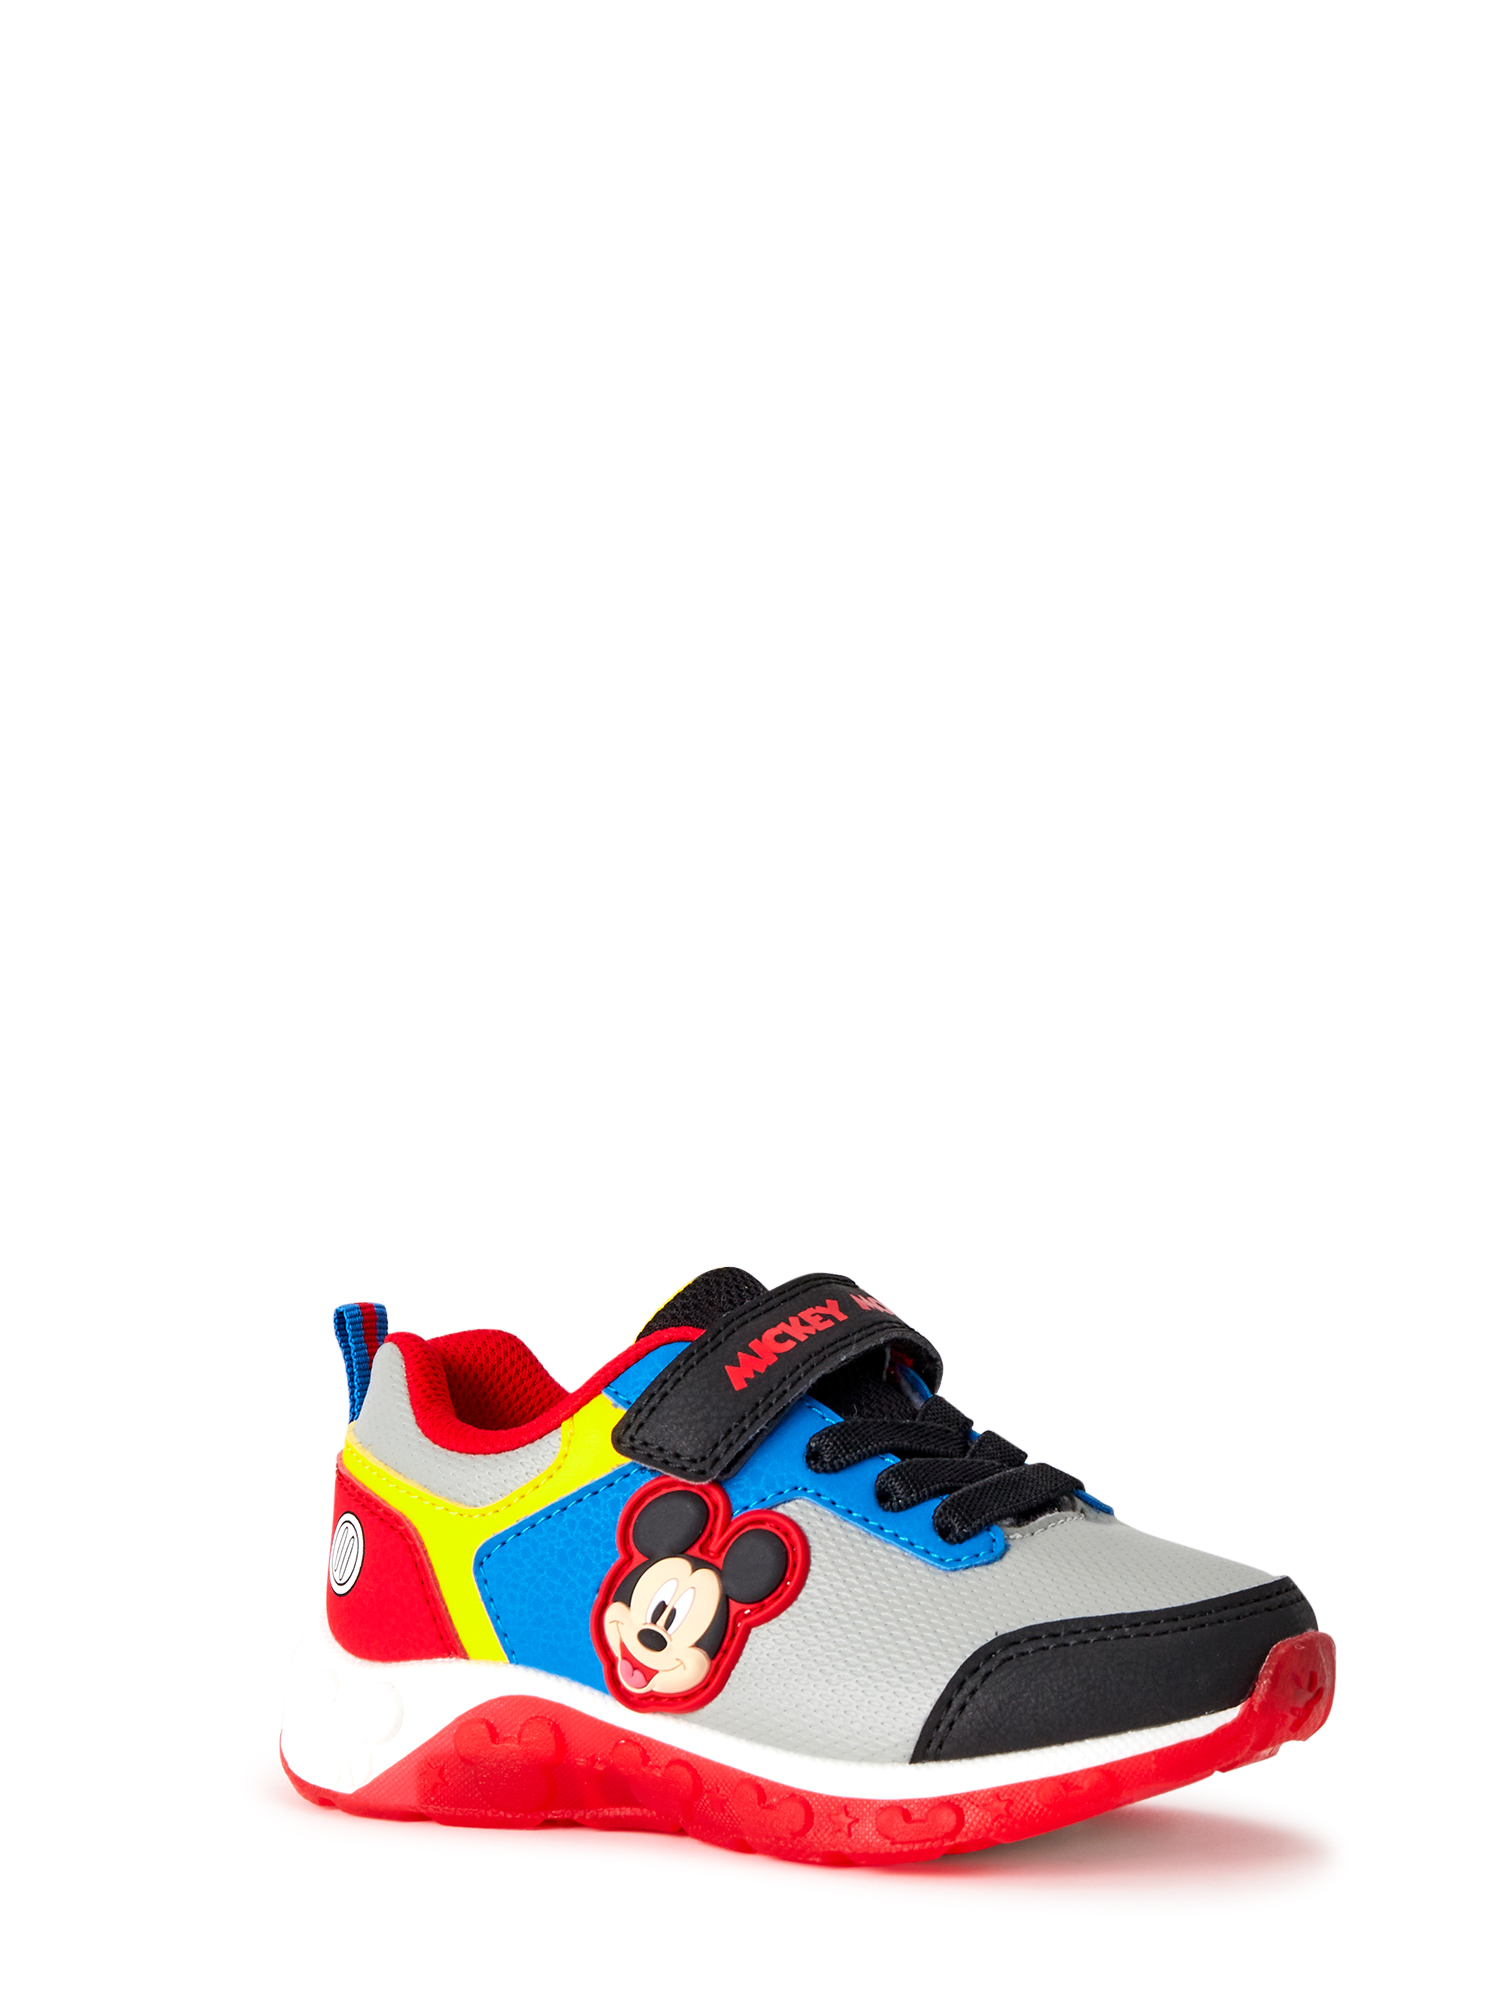 Bediende Fraude spectrum Mickey Mouse Toddler Boys Light Up Athletic Sneakers, Sizes 7-12 -  Walmart.com